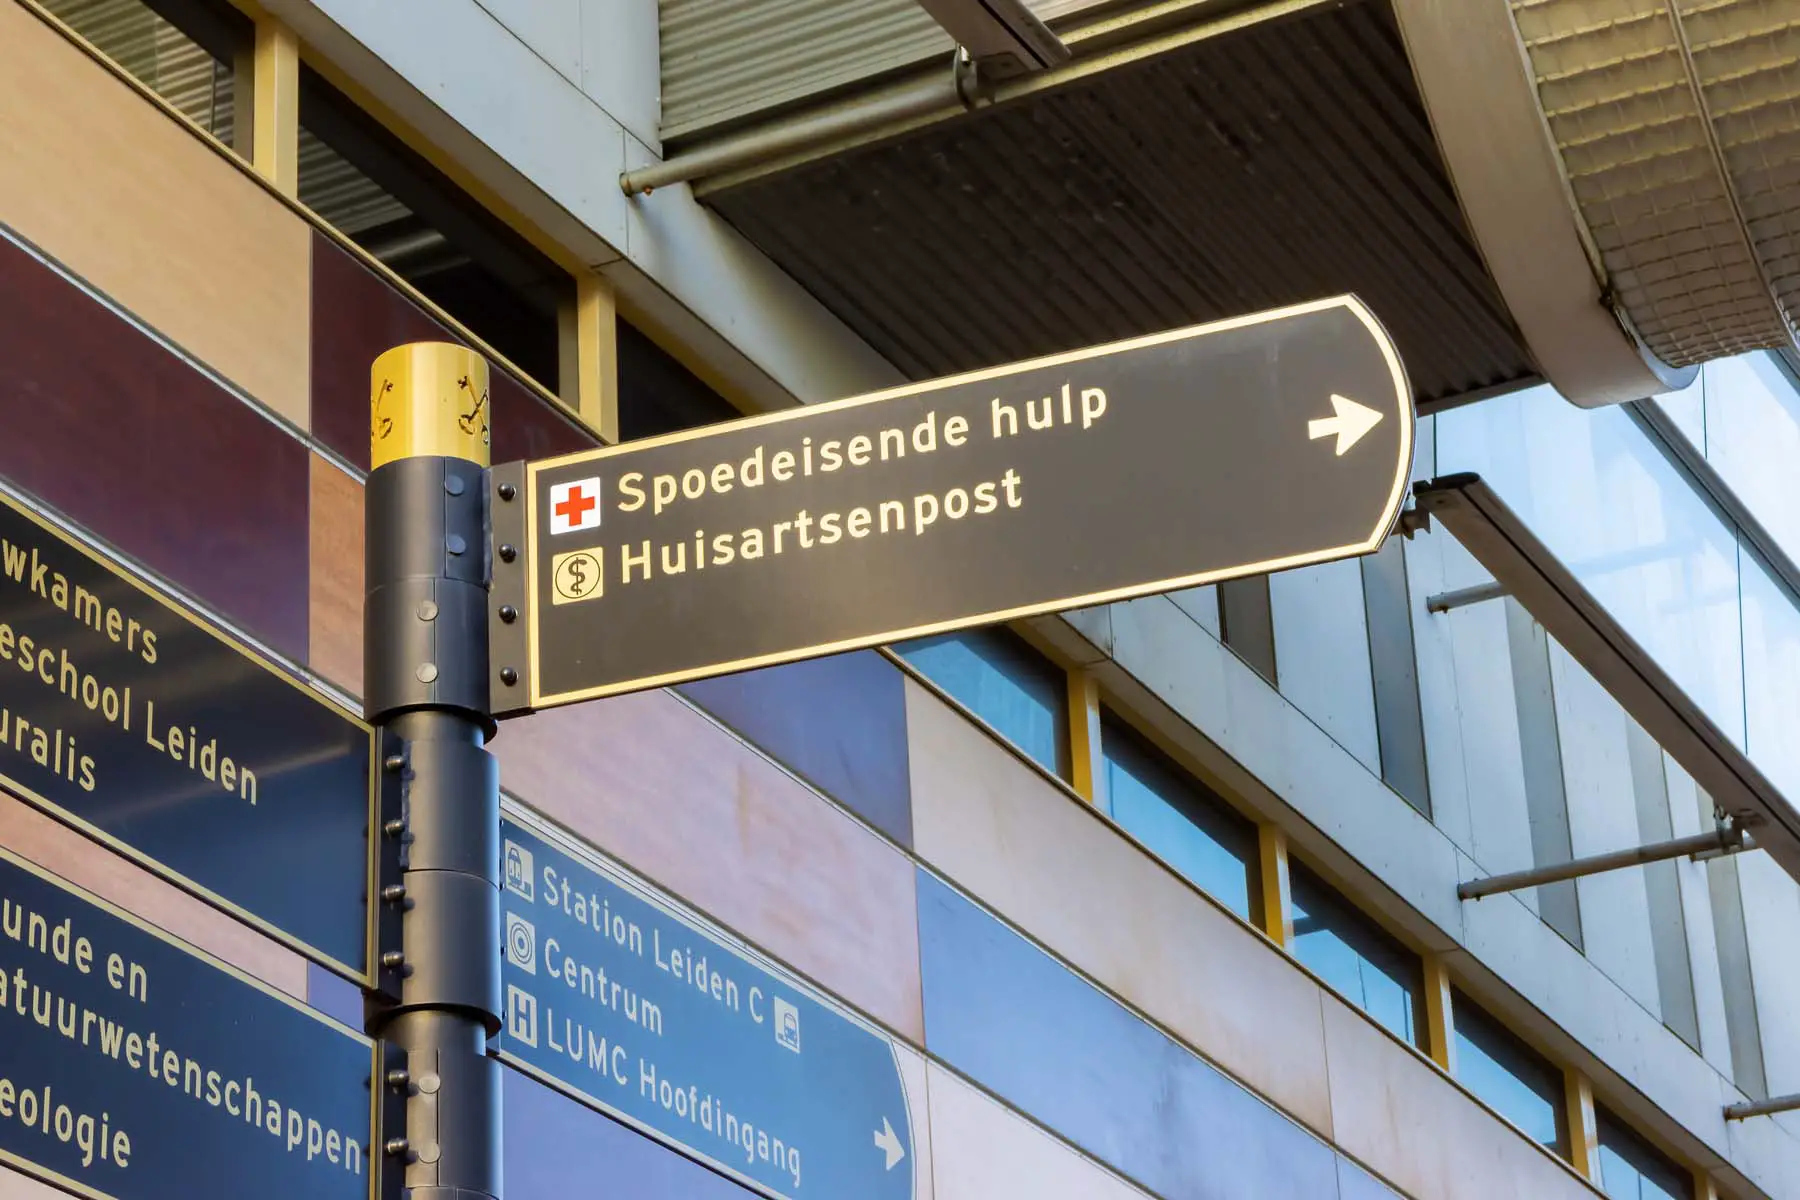 singpost for the huisartsenpost at a hospital in the Netherlands